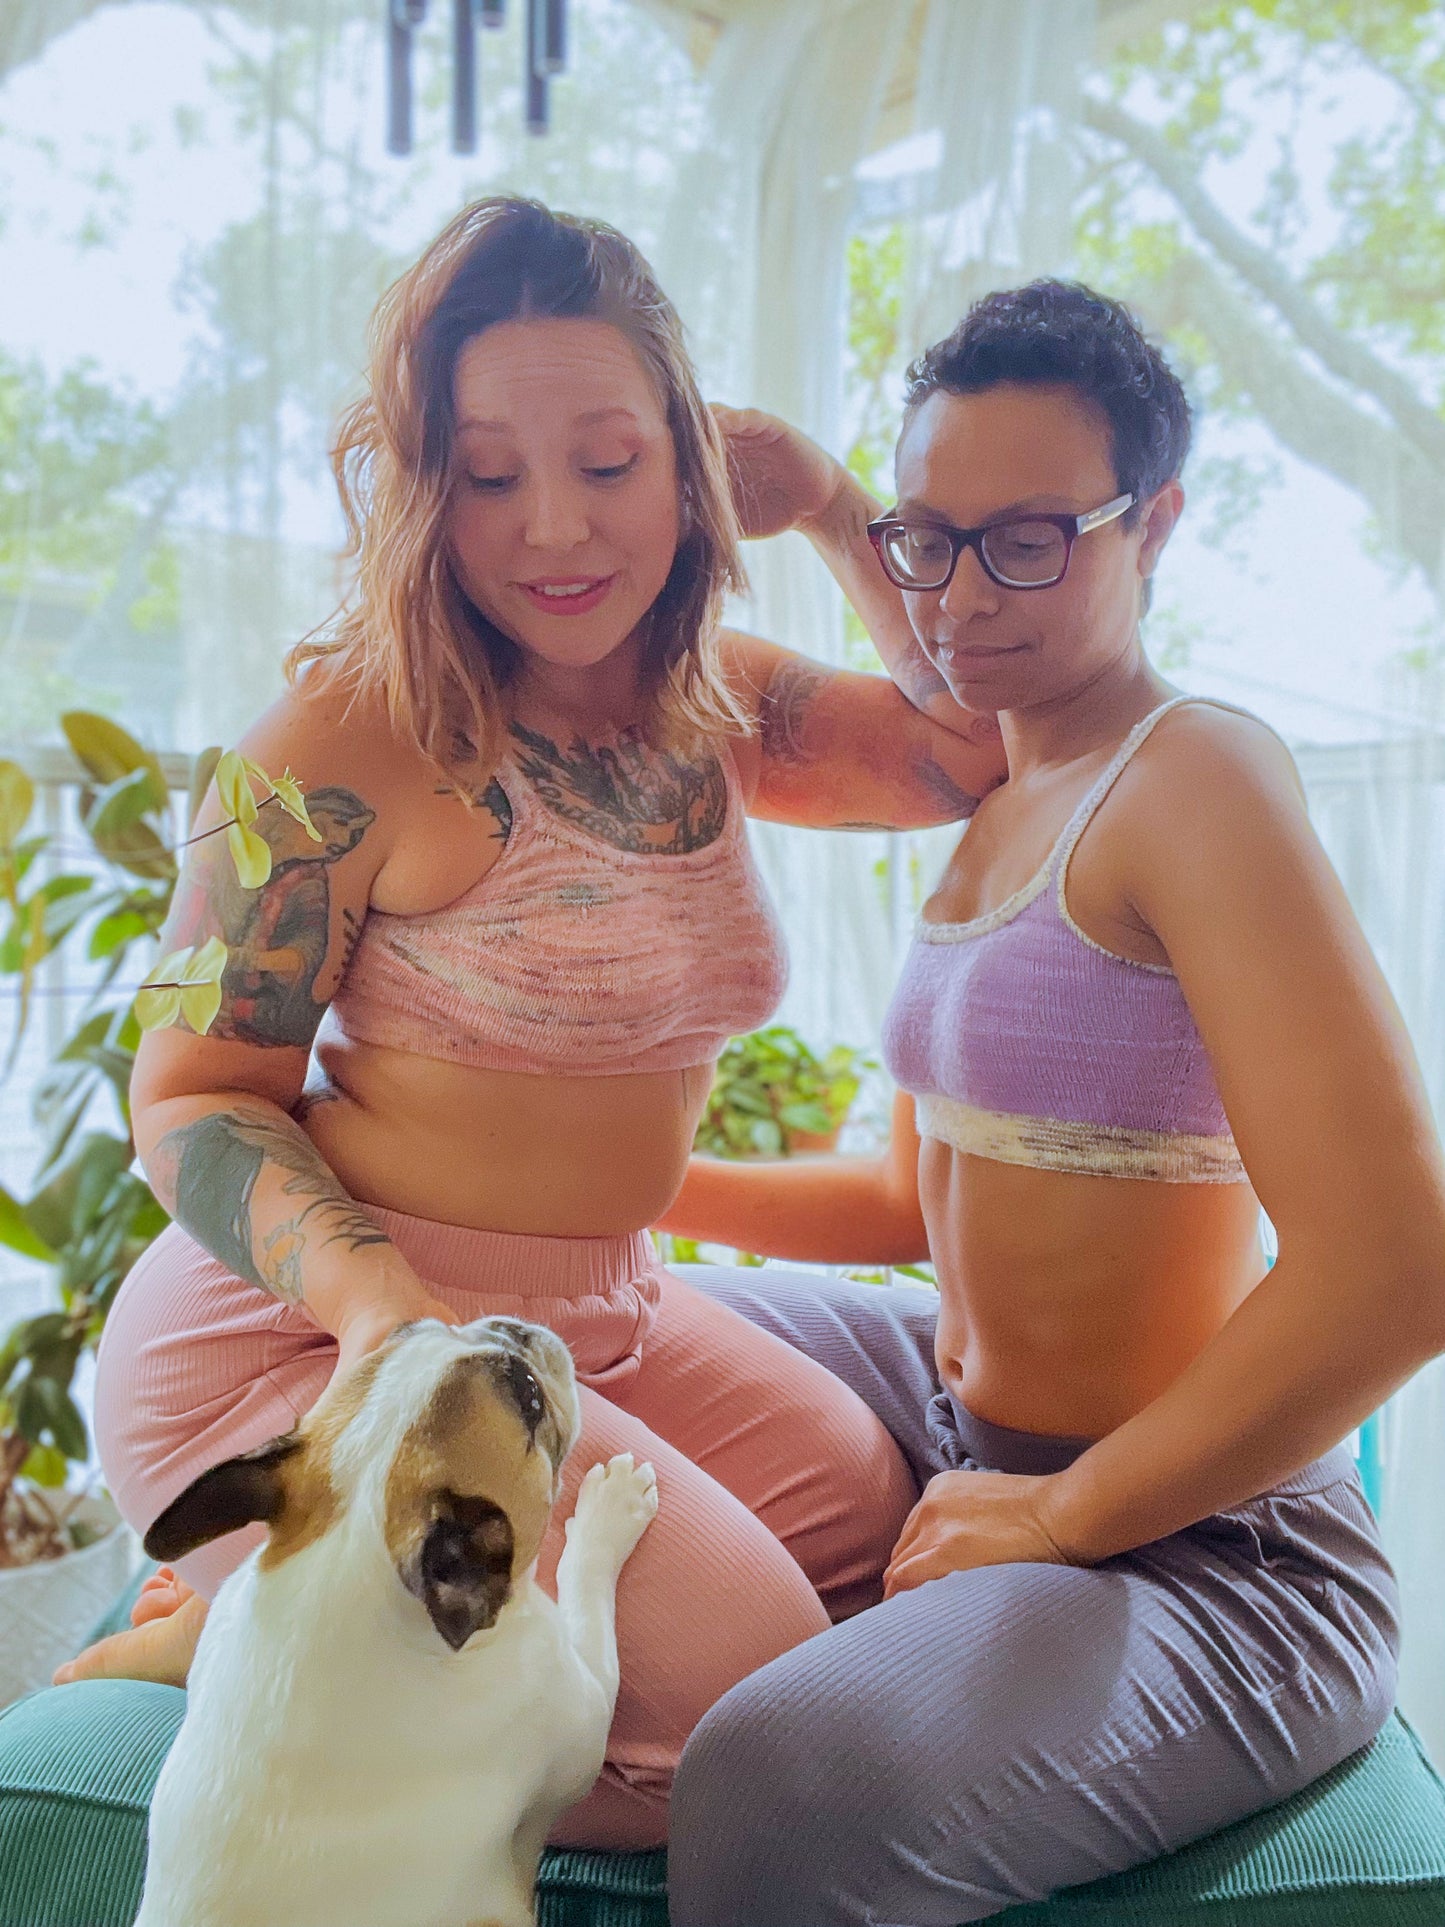 Bess and Candace kneel on a puff stool, looking down at a white and brown Frenchie. Bess and Candace each wear a well-fitted, hand knit bralette. Bess' is made with light pink speckled yarn, and Candace is made with light purple yarn and a white speckled band.